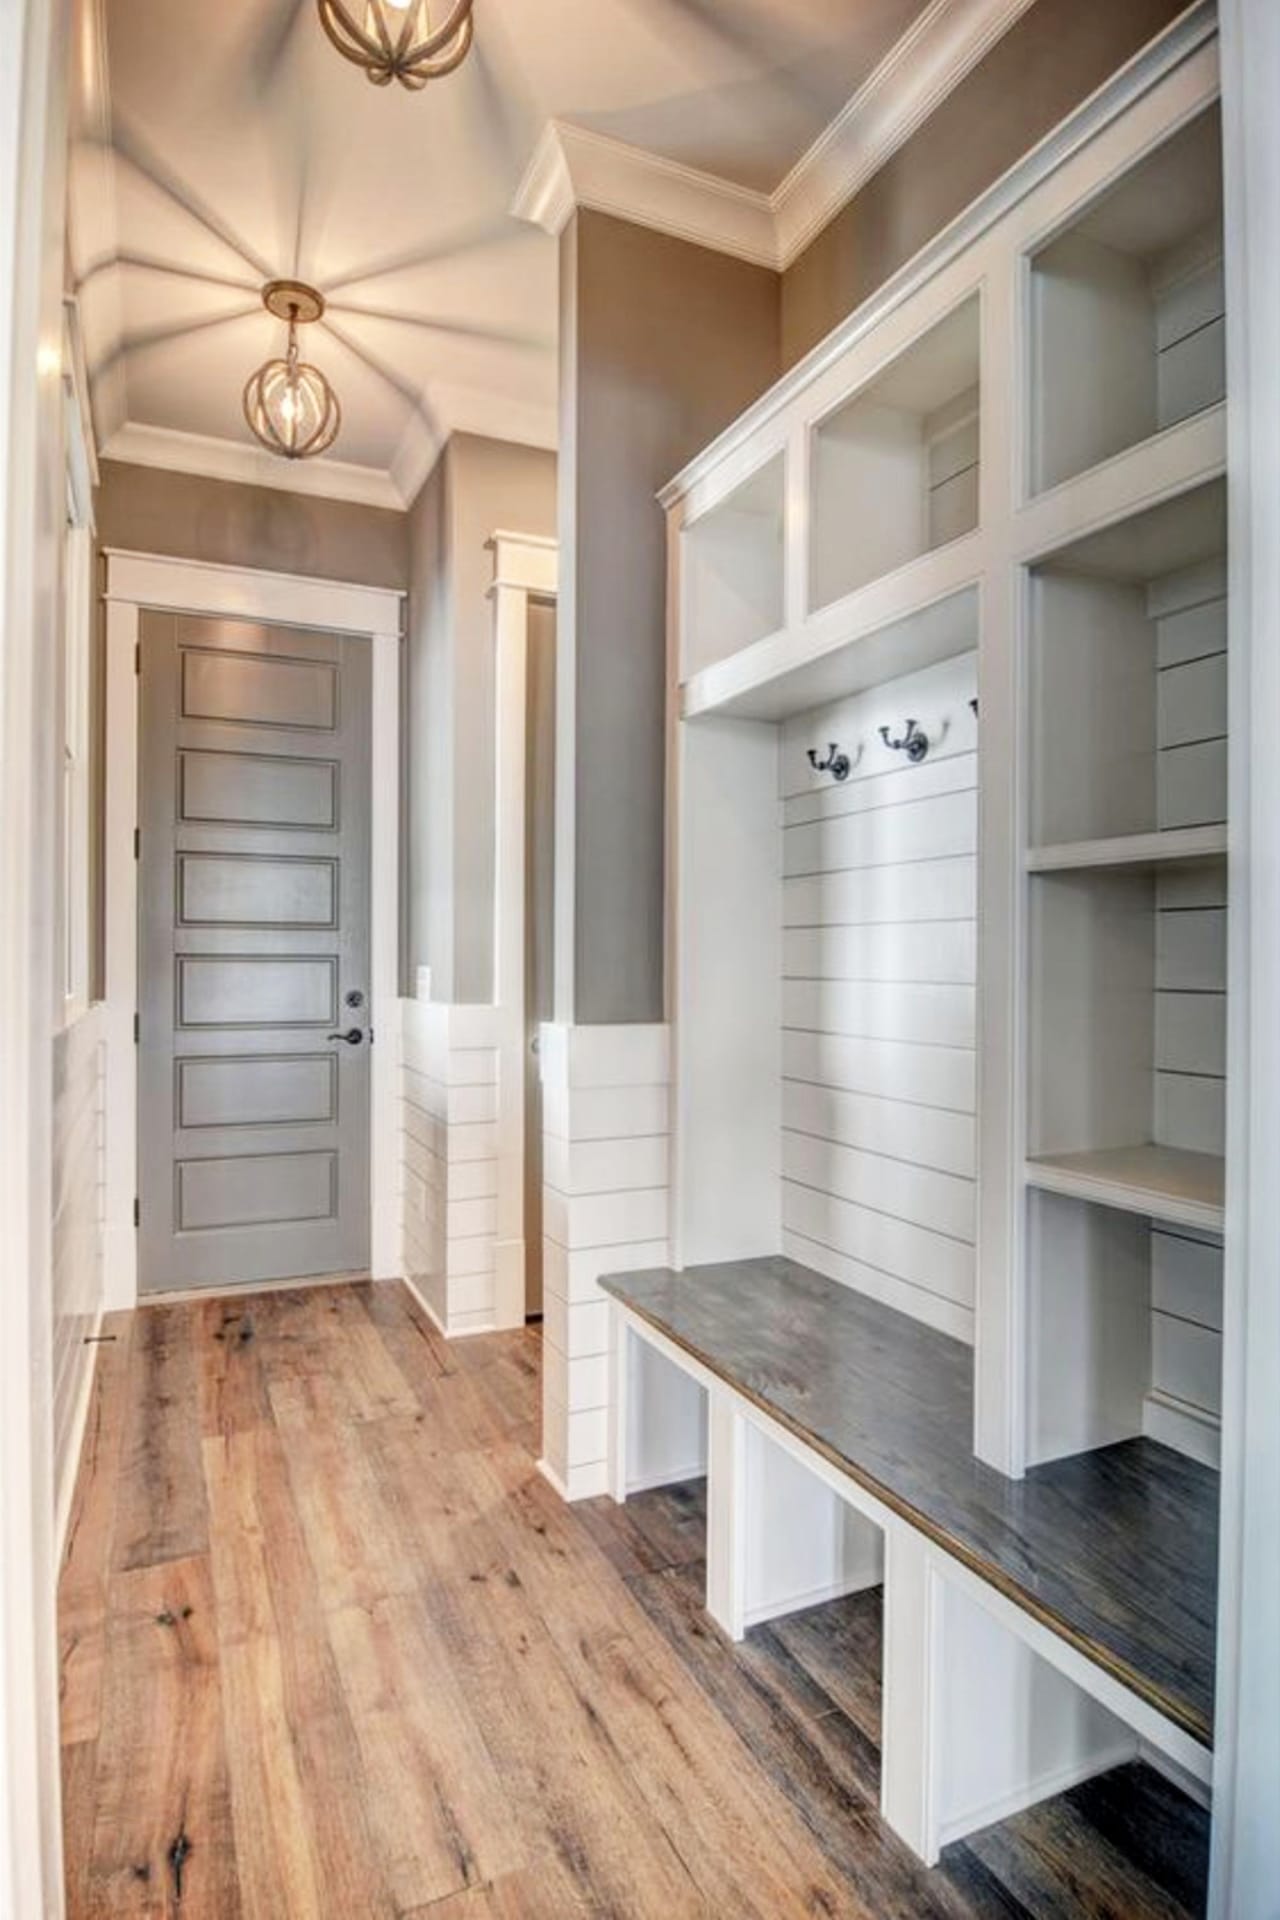 farmhouse mudroom ideas - grey and white modern country style mudroom ideas for entryway mud rooms or laundry mudrooms